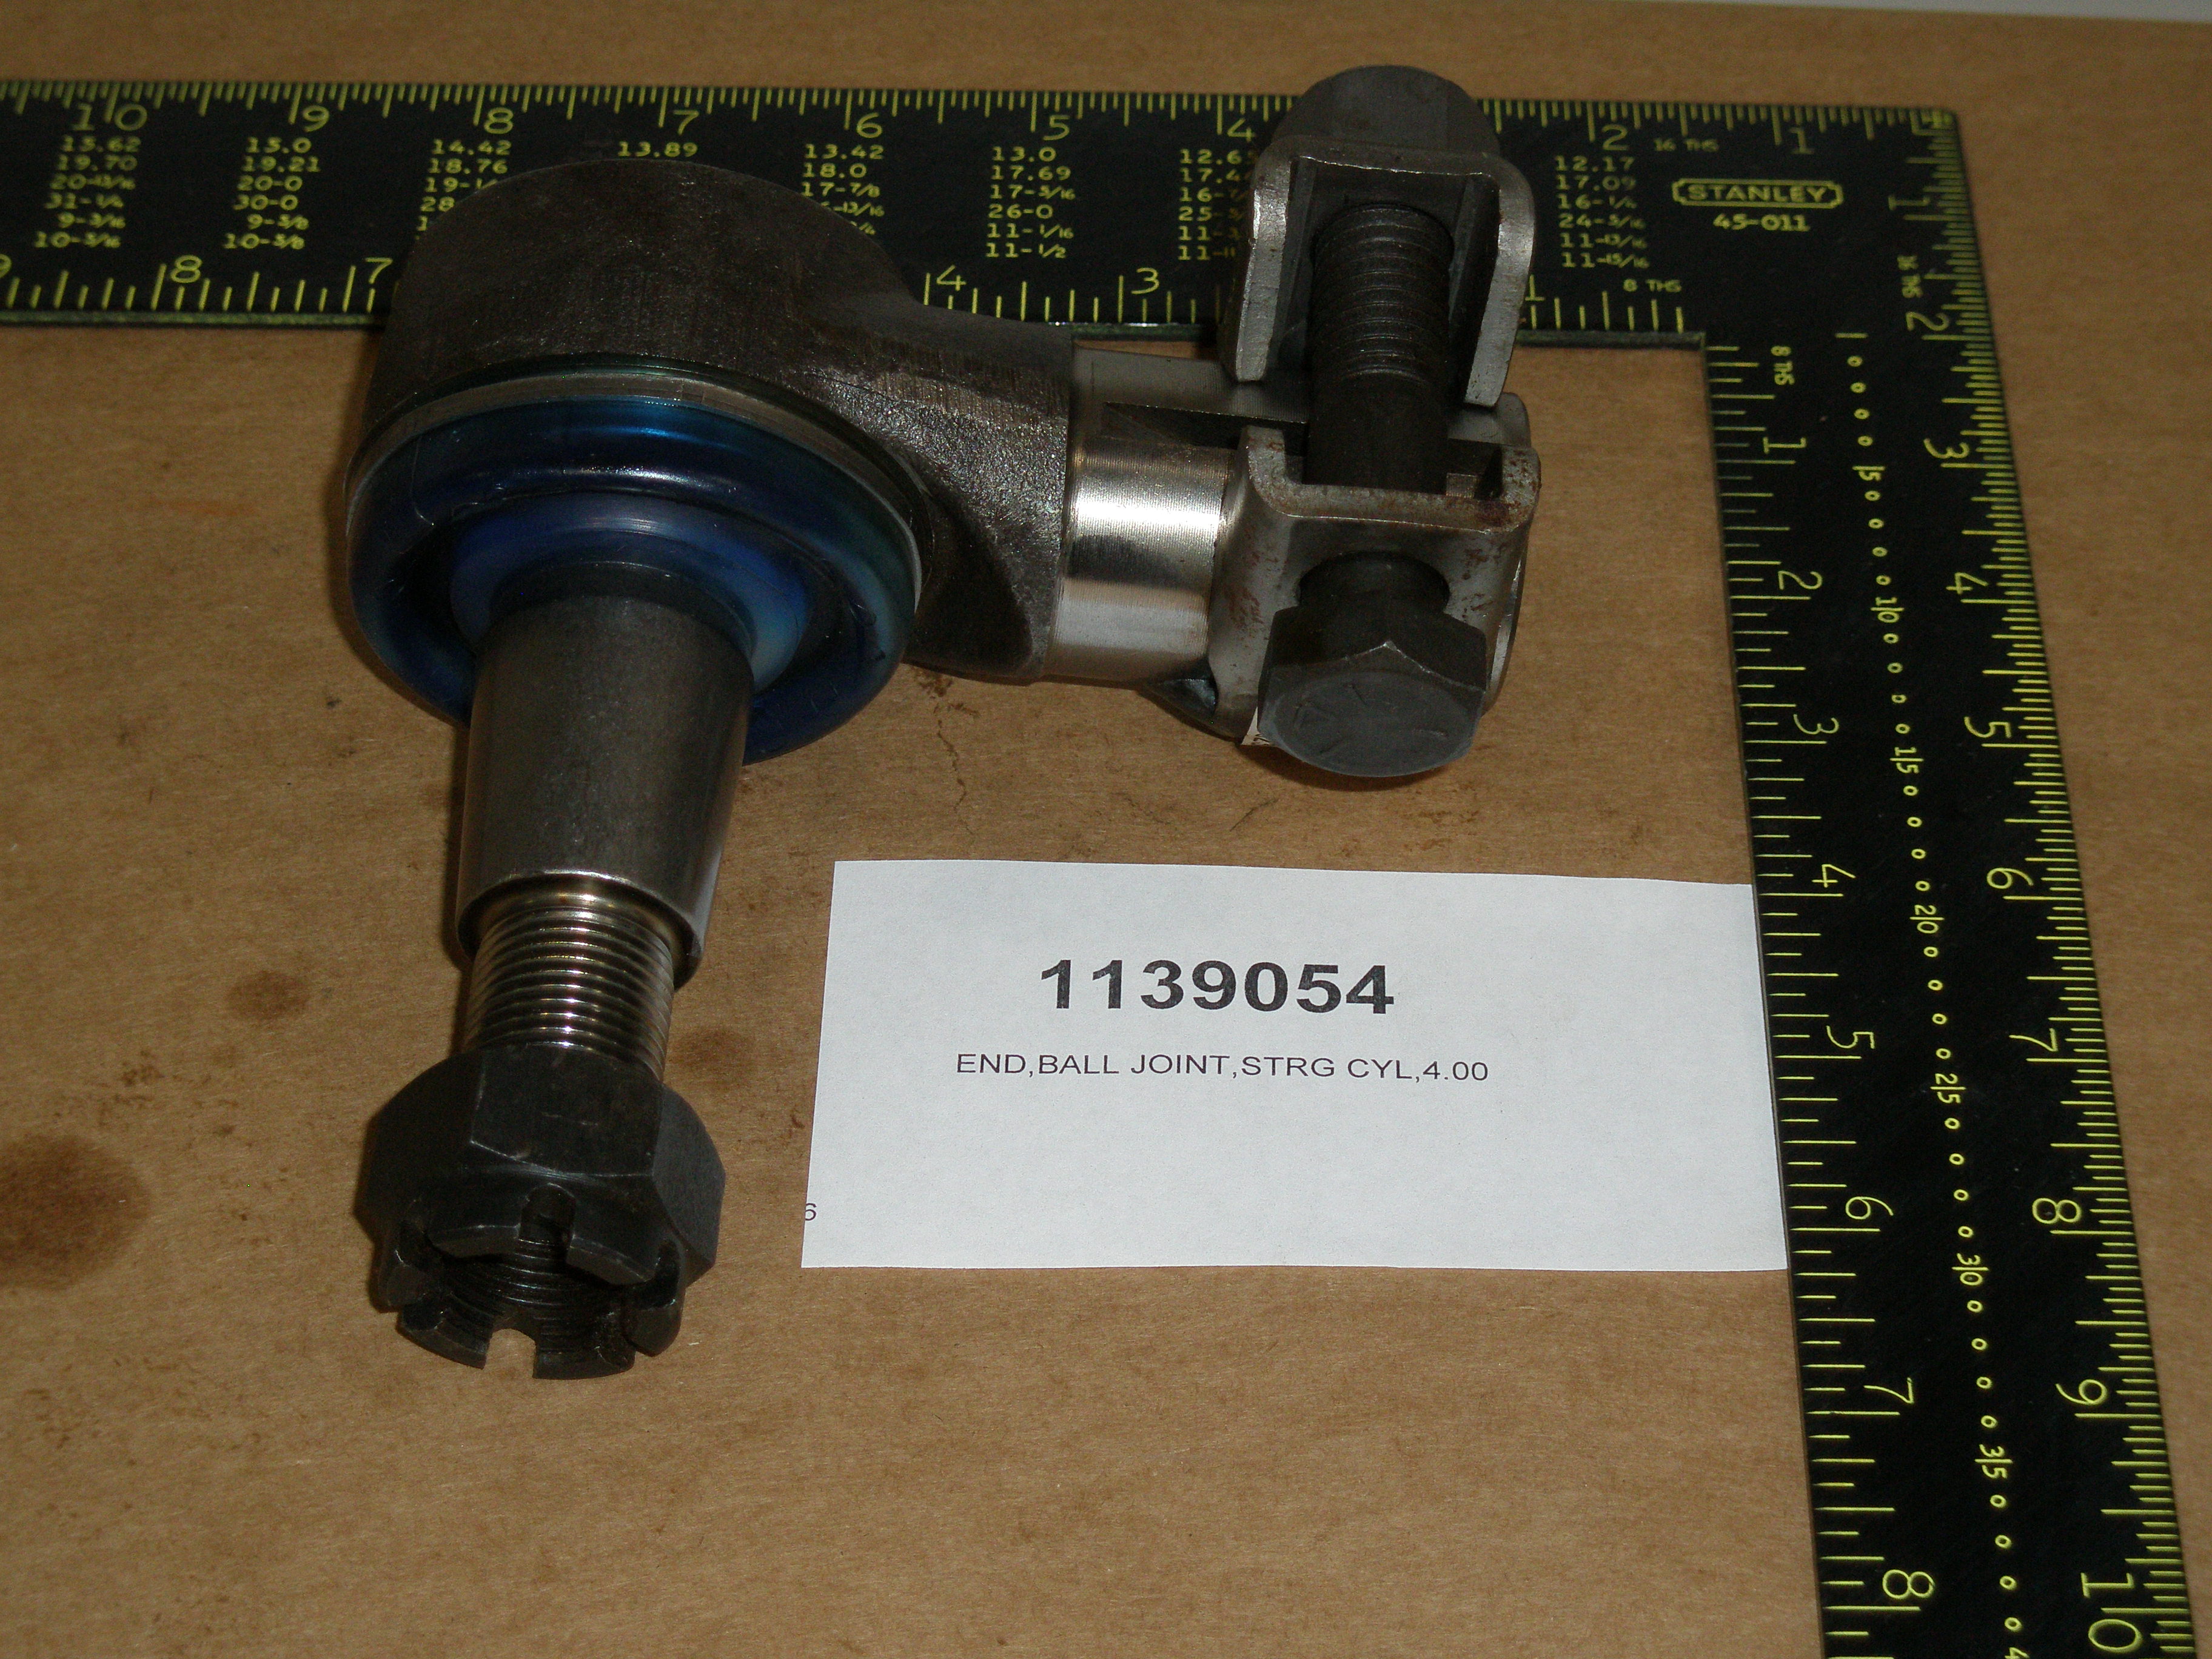 END,BALL JOINT,STRG CYL,4.00